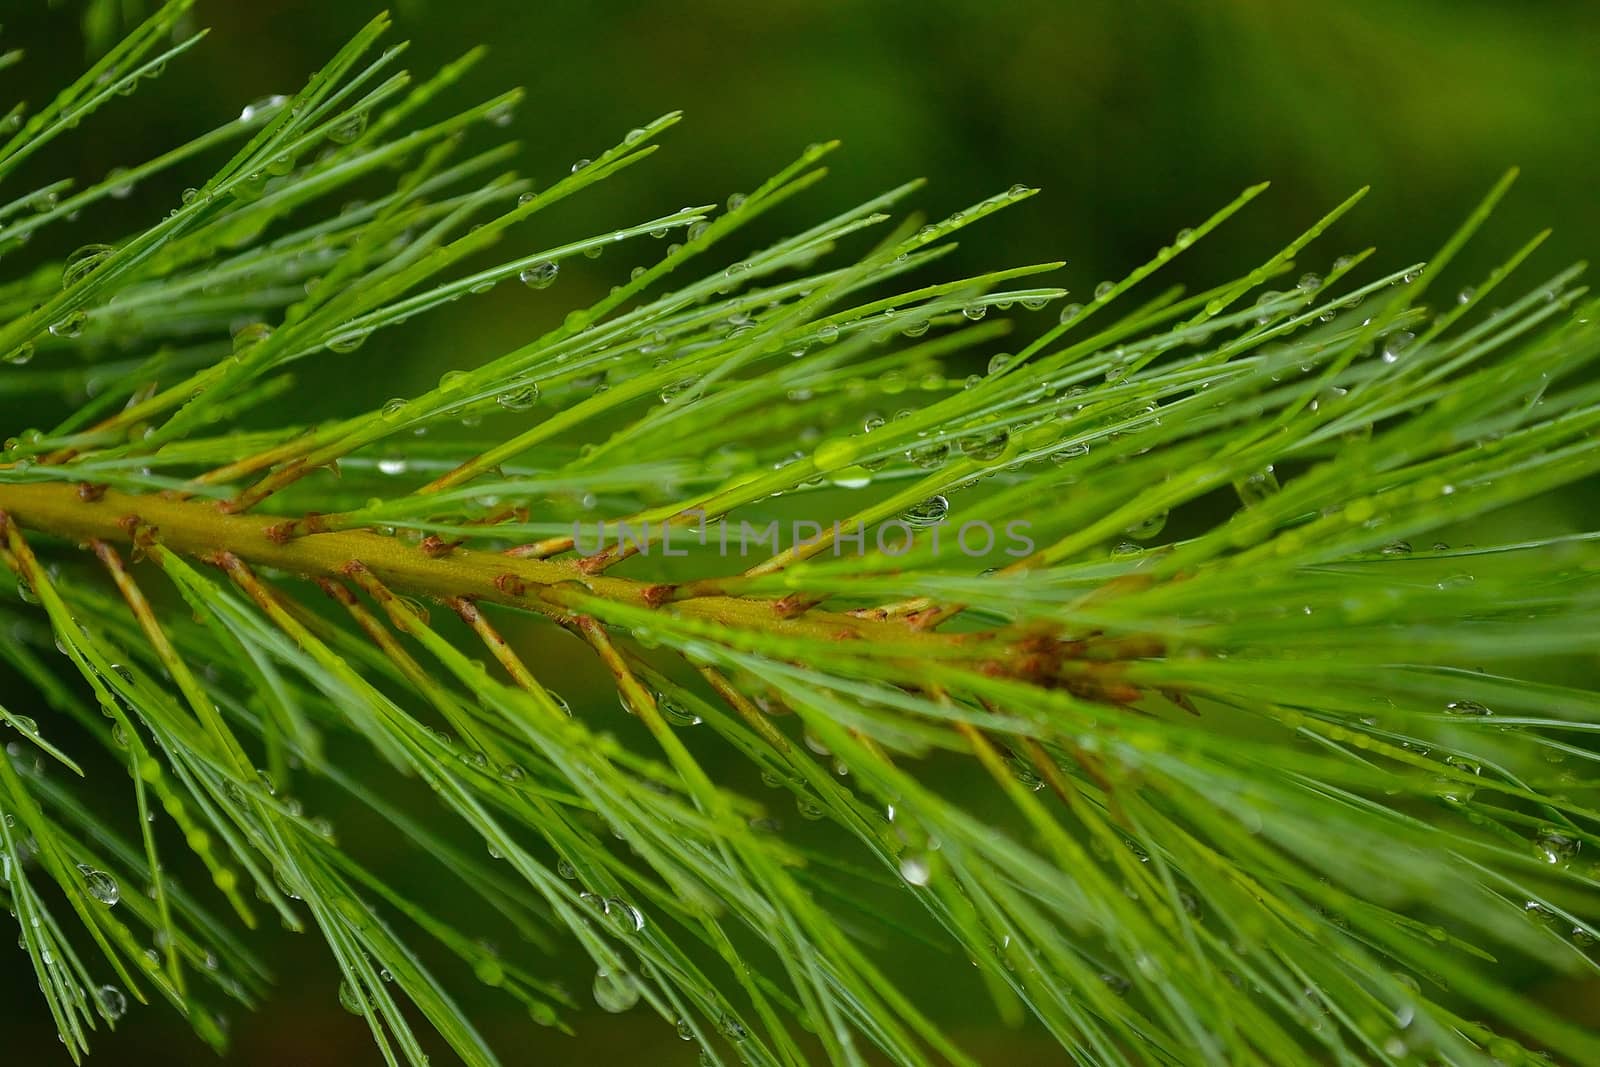 Water drops on a pine branch by rmbarricarte